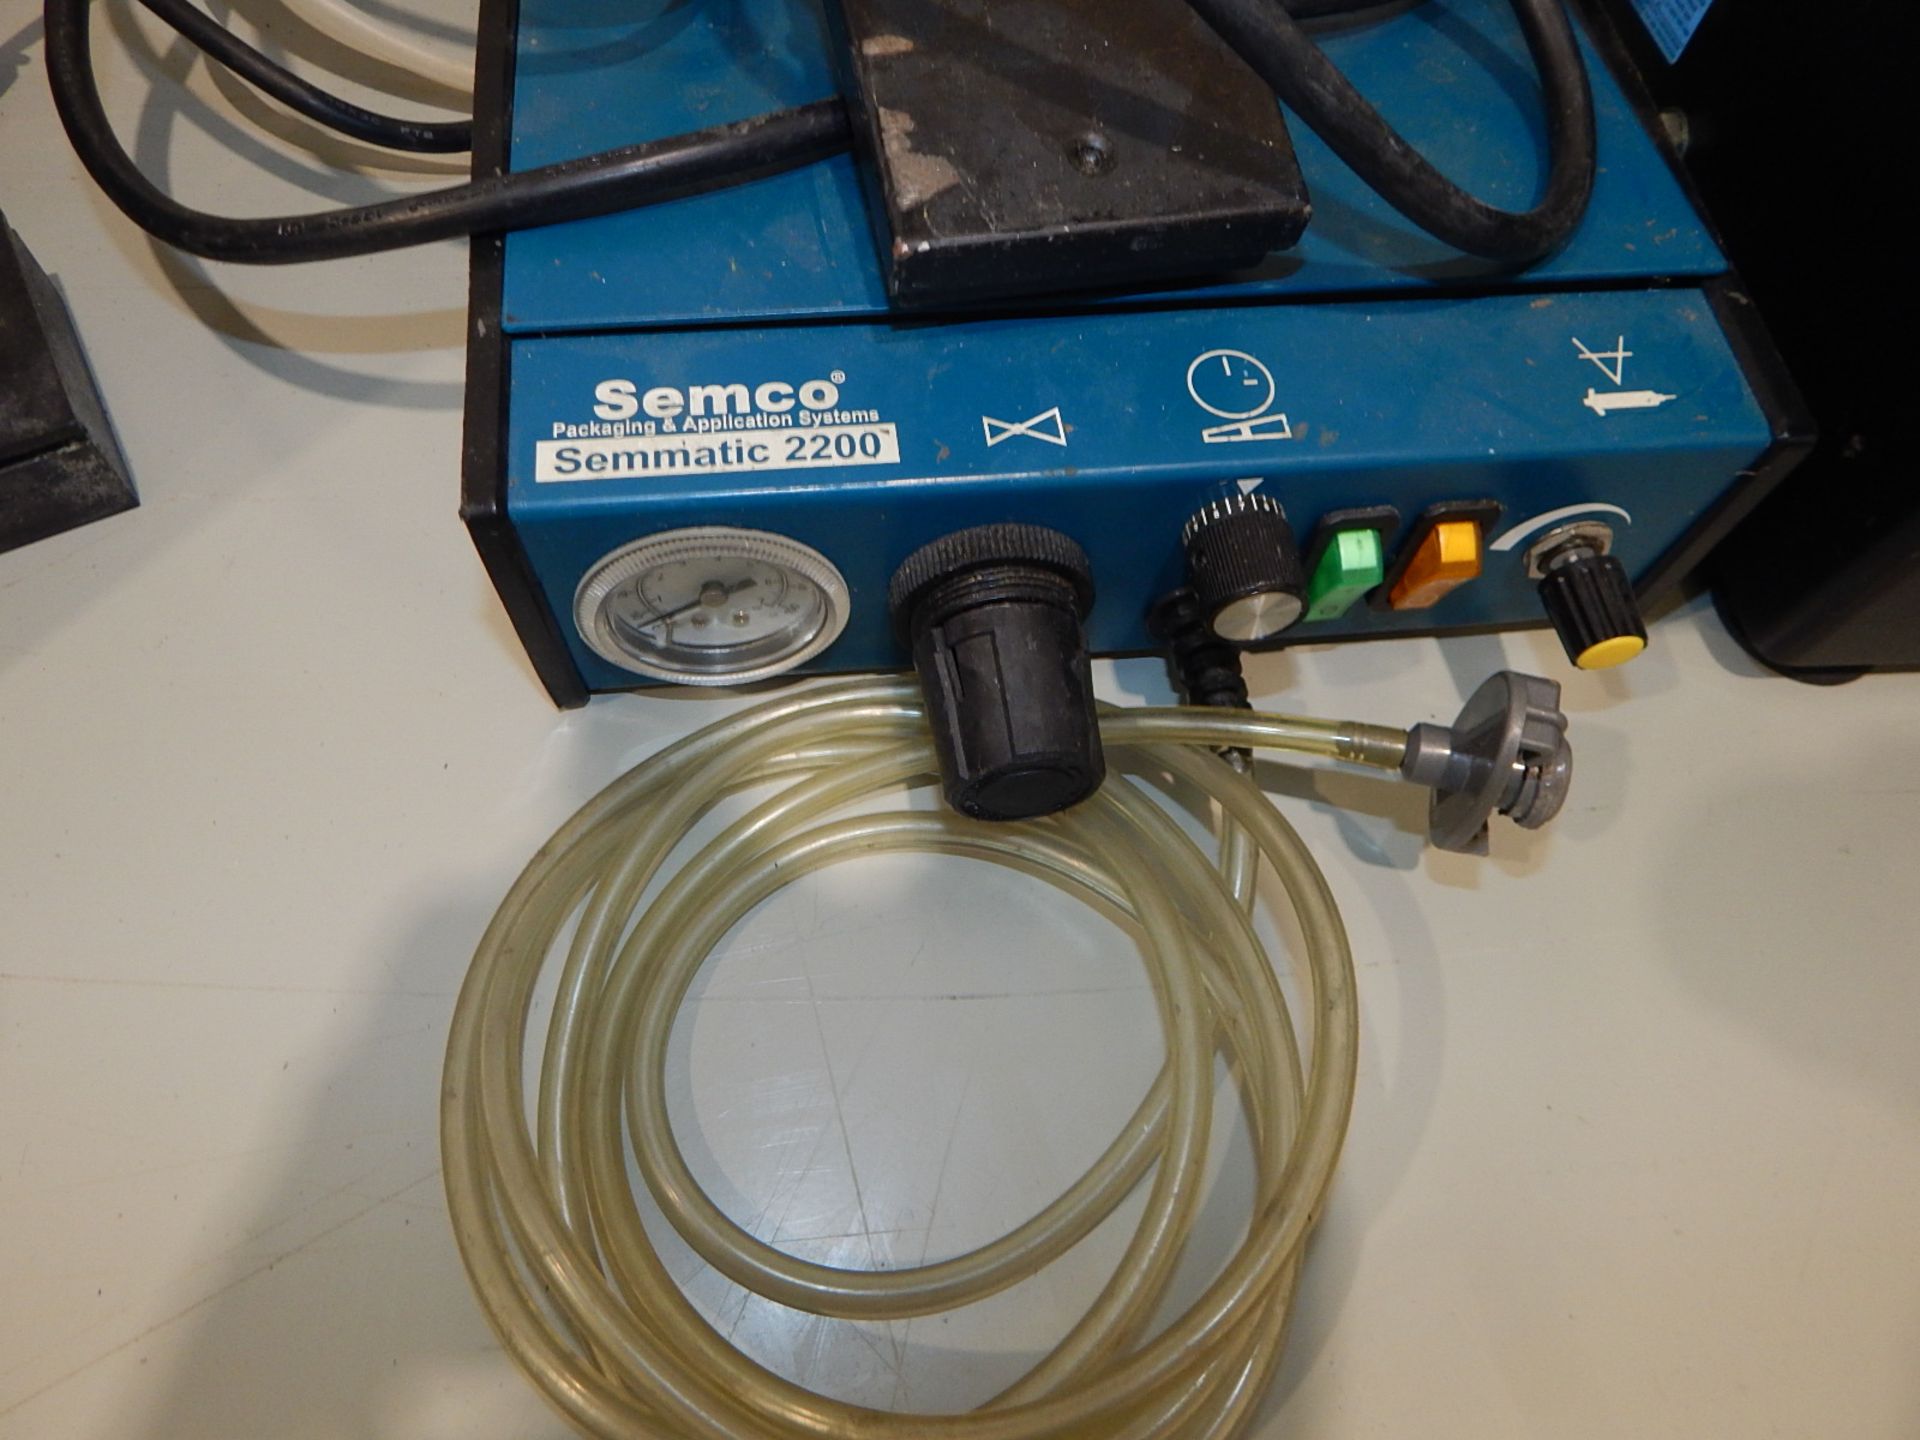 SEMECO SEMMATIC 2200 PACKAGING AND APPLICATION SYSTEM WITH SUPPLIES, S/N N/A - Image 2 of 6